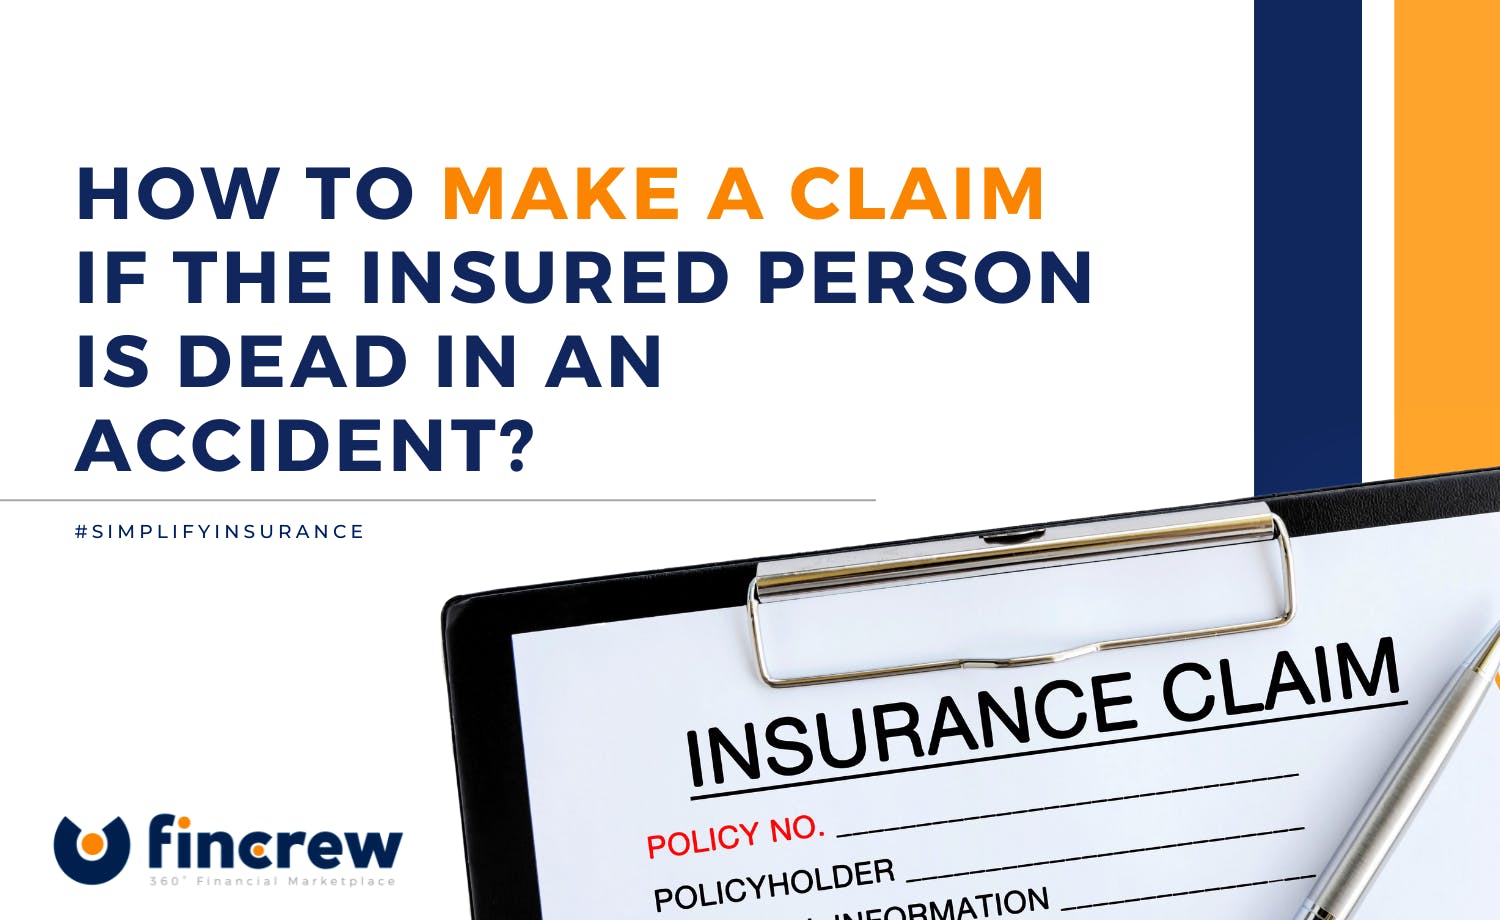 Guide To Make a Claim If The Insured Person Is Dead In An Accident